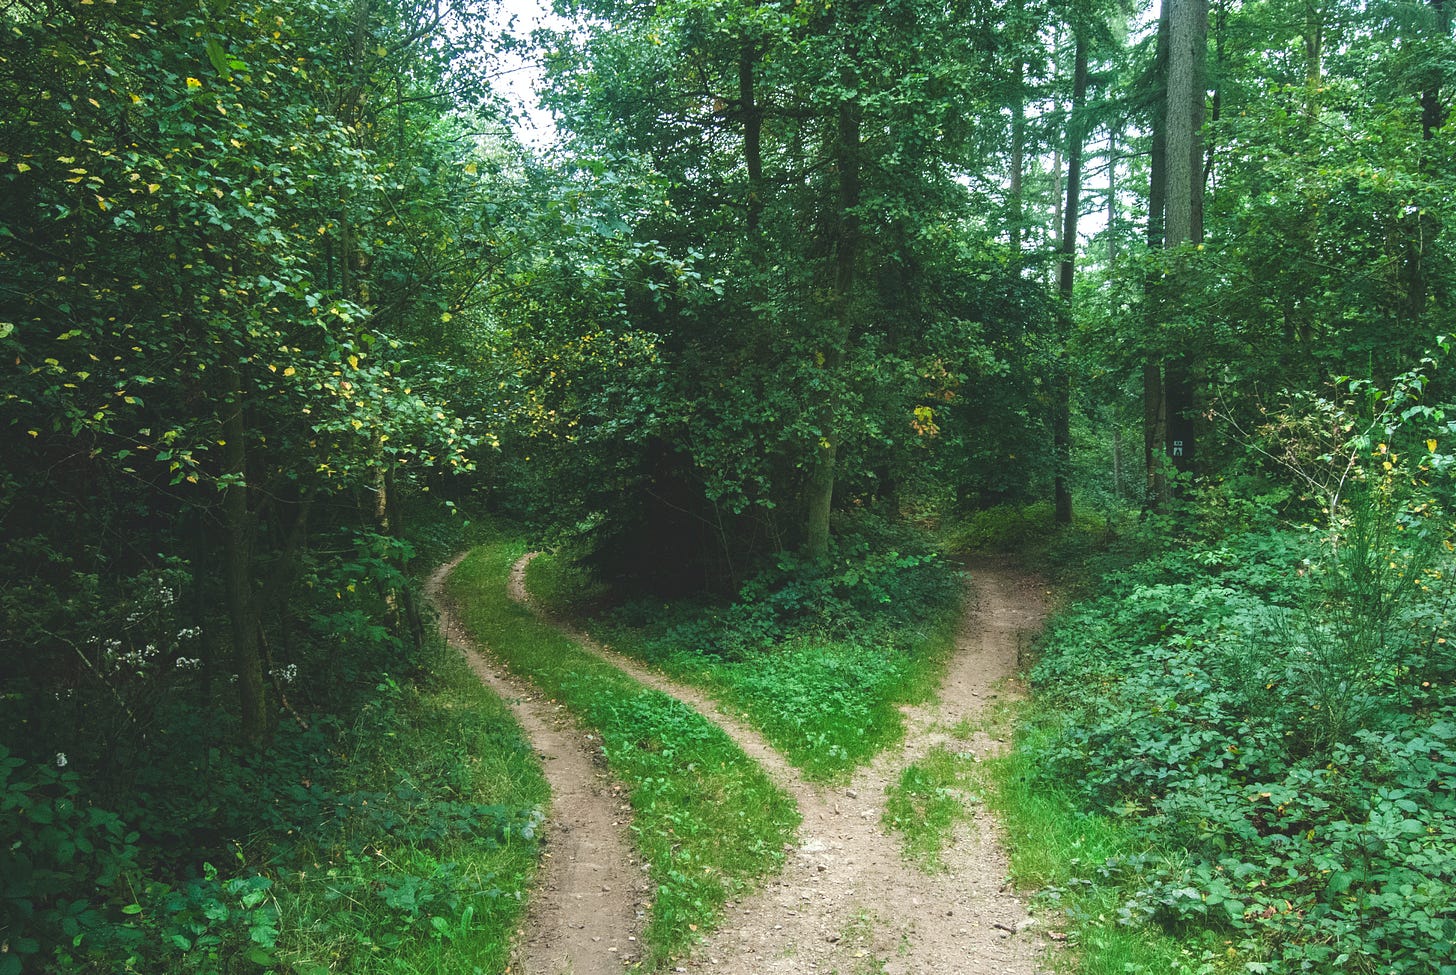 Two dirt paths diverging in a green forest by Jens Lelie from Unsplash.